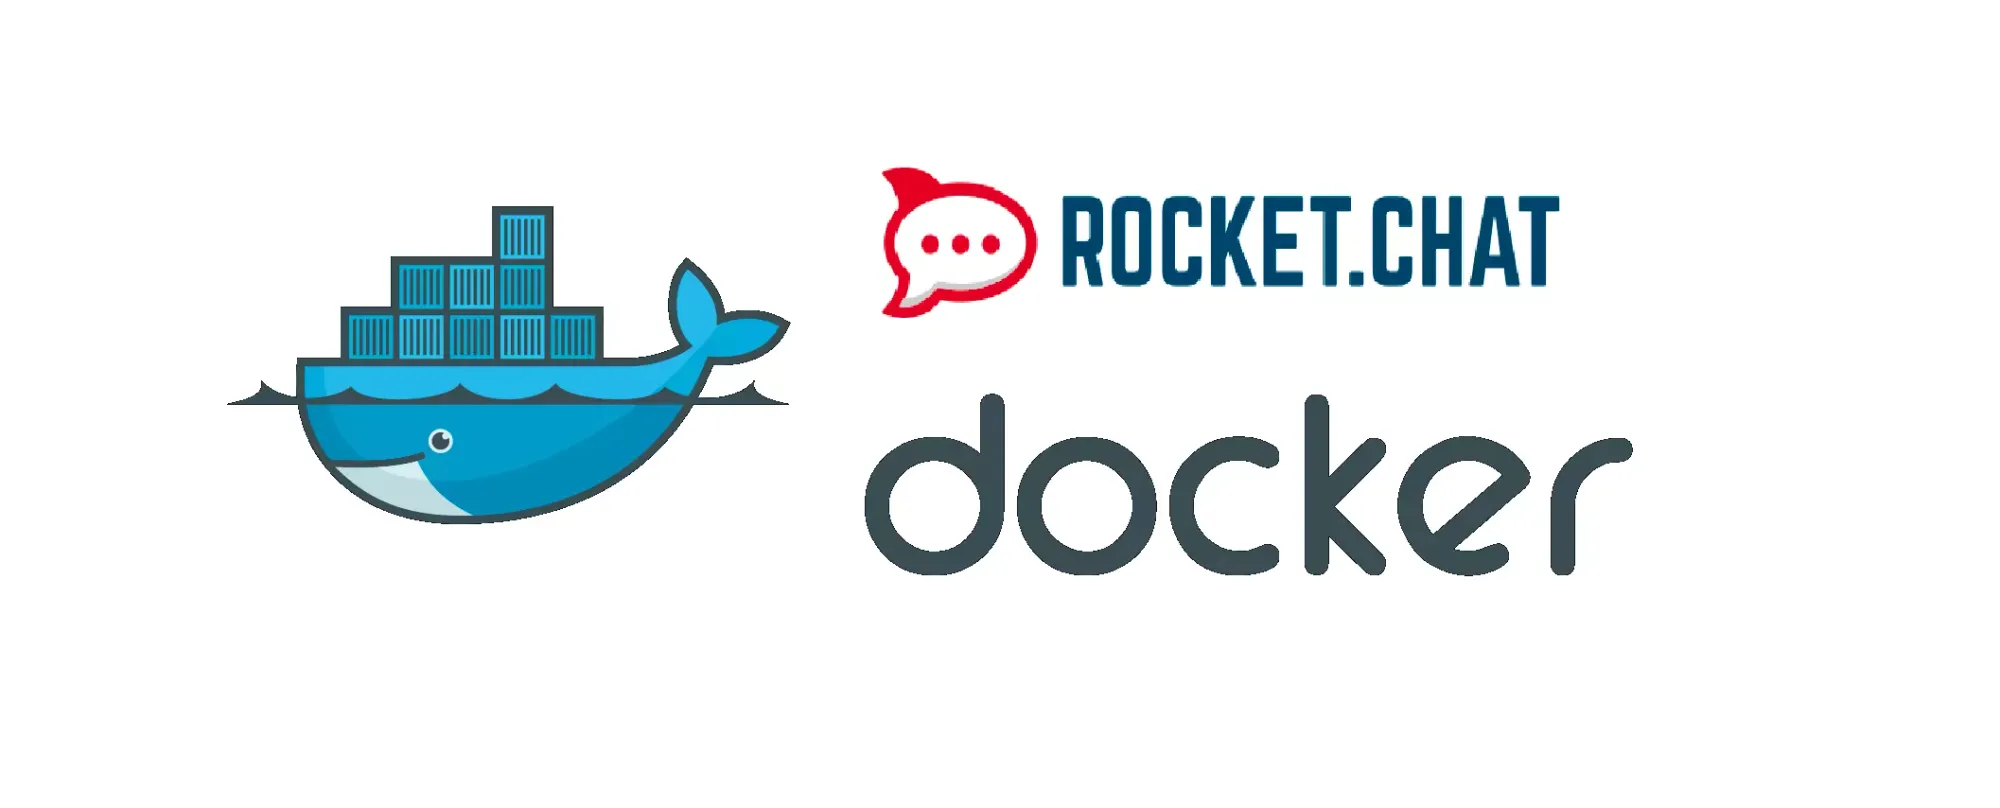 Upgrade Rocket.Chat from 3.x to 4.0, MongoDB from 4.0 to 5.0 via Docker